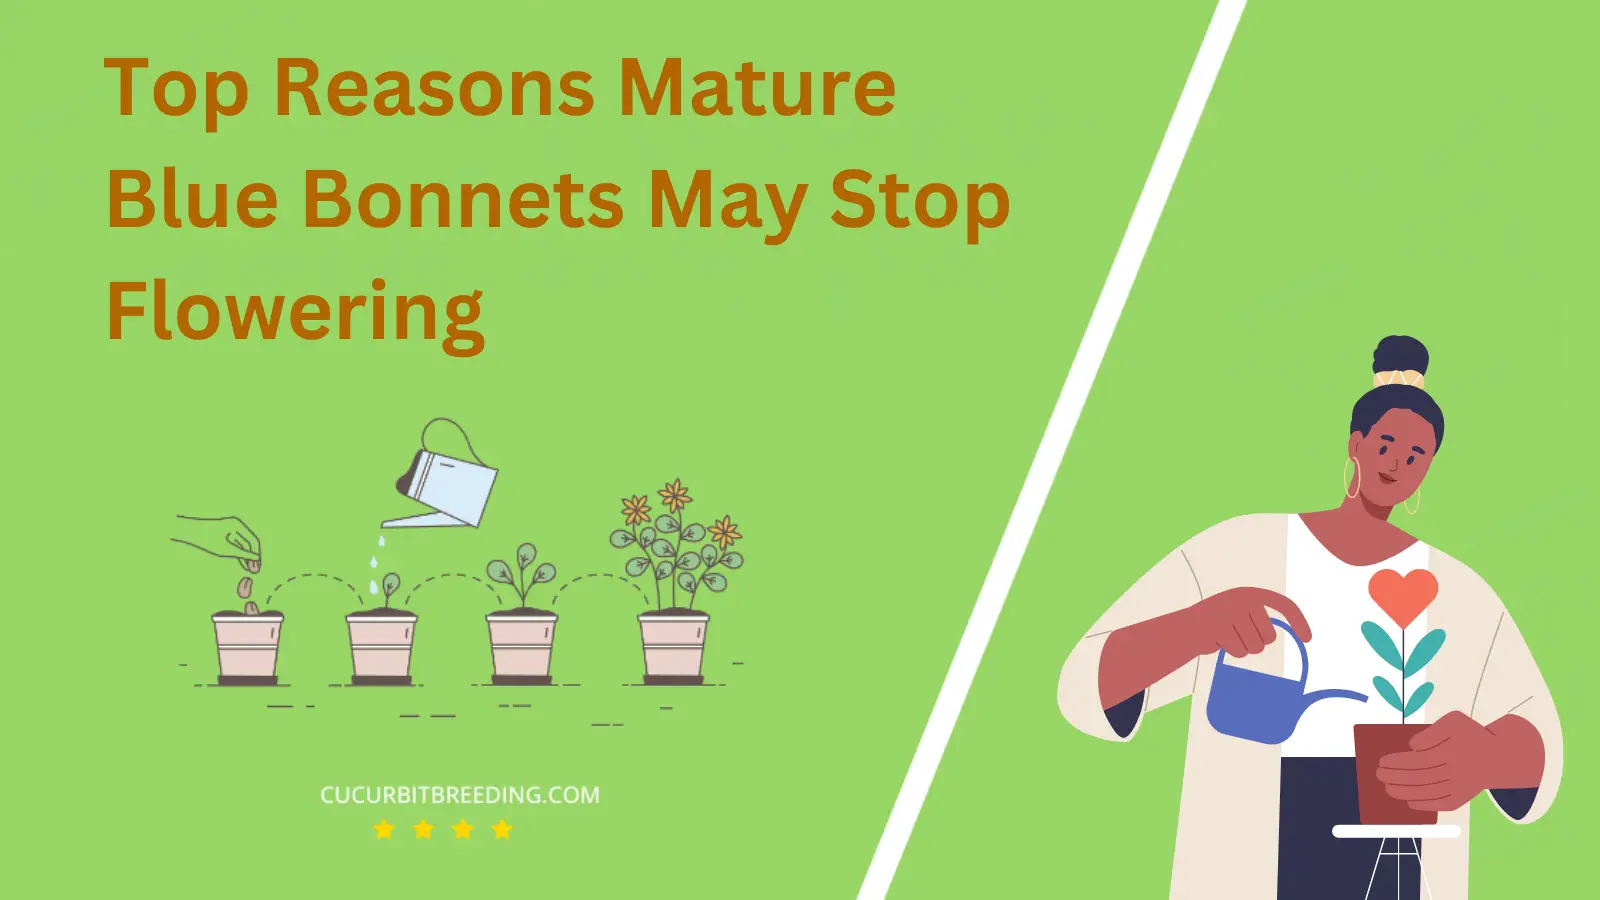 Top Reasons Mature Blue Bonnets May Stop Flowering